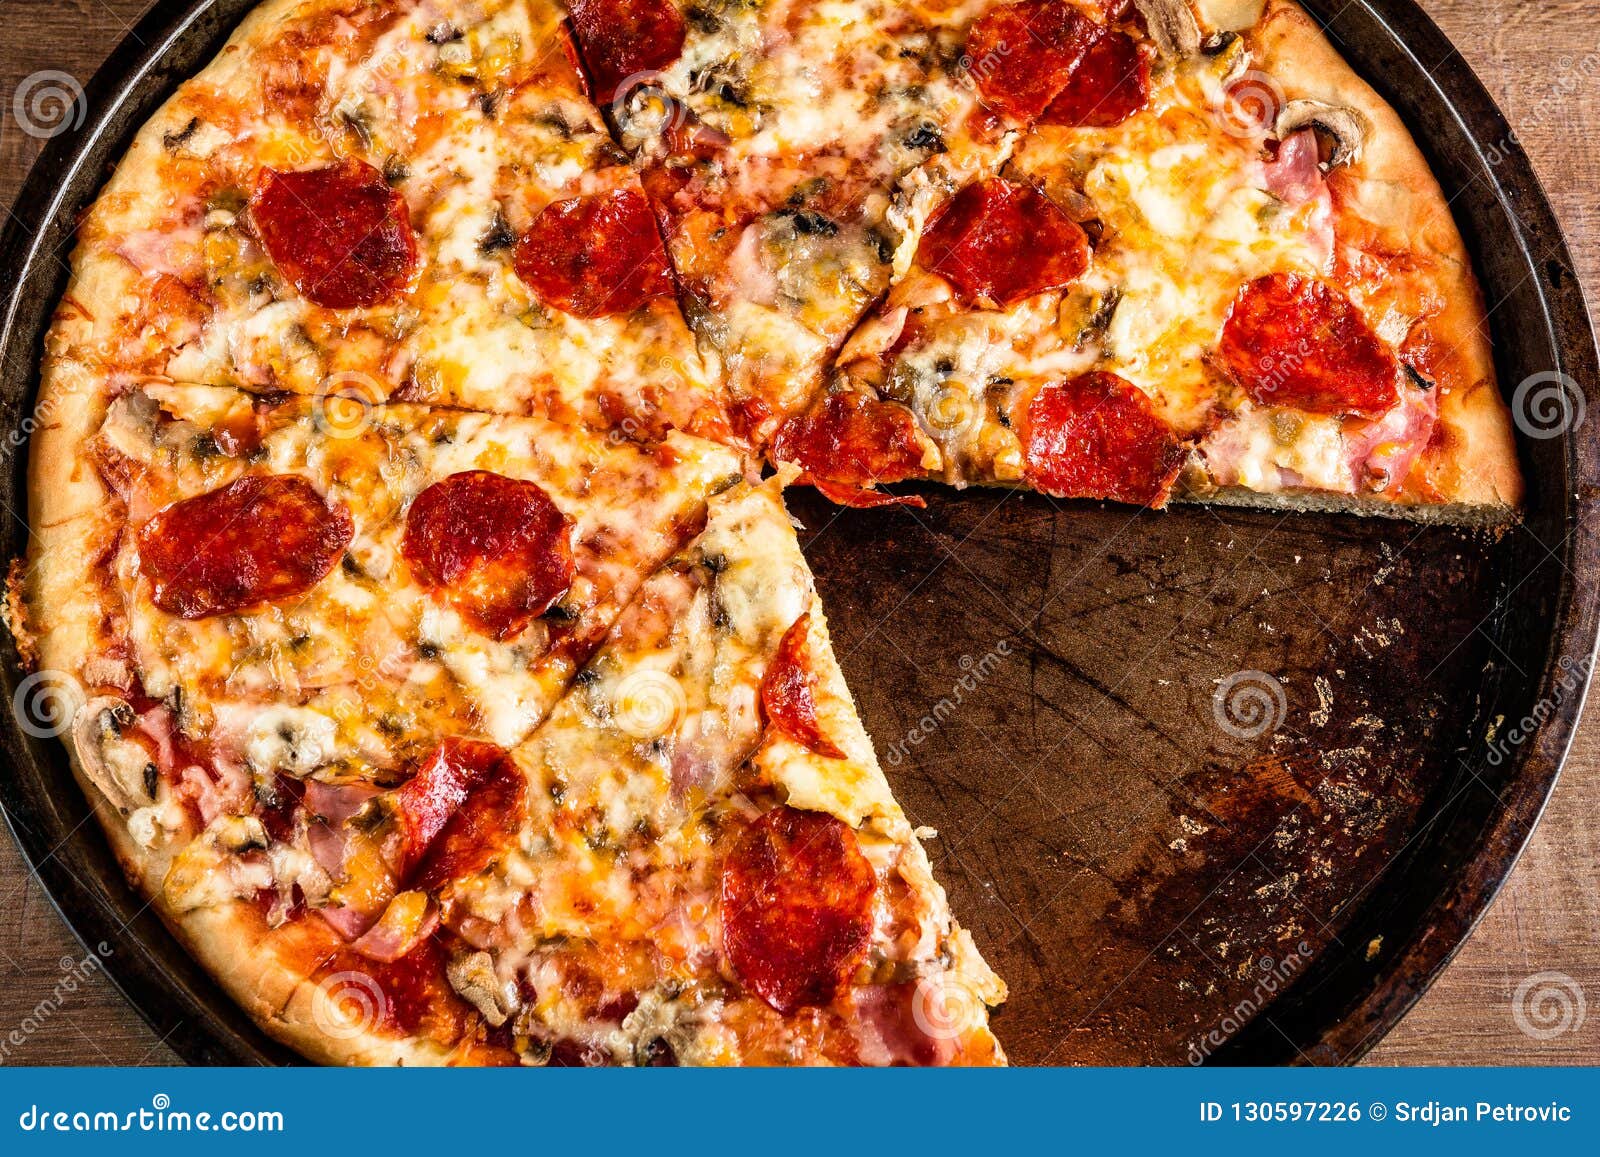 Delicious Cut Pizza In A Large Round Plate Stock Photo Image Of Miss Wooden